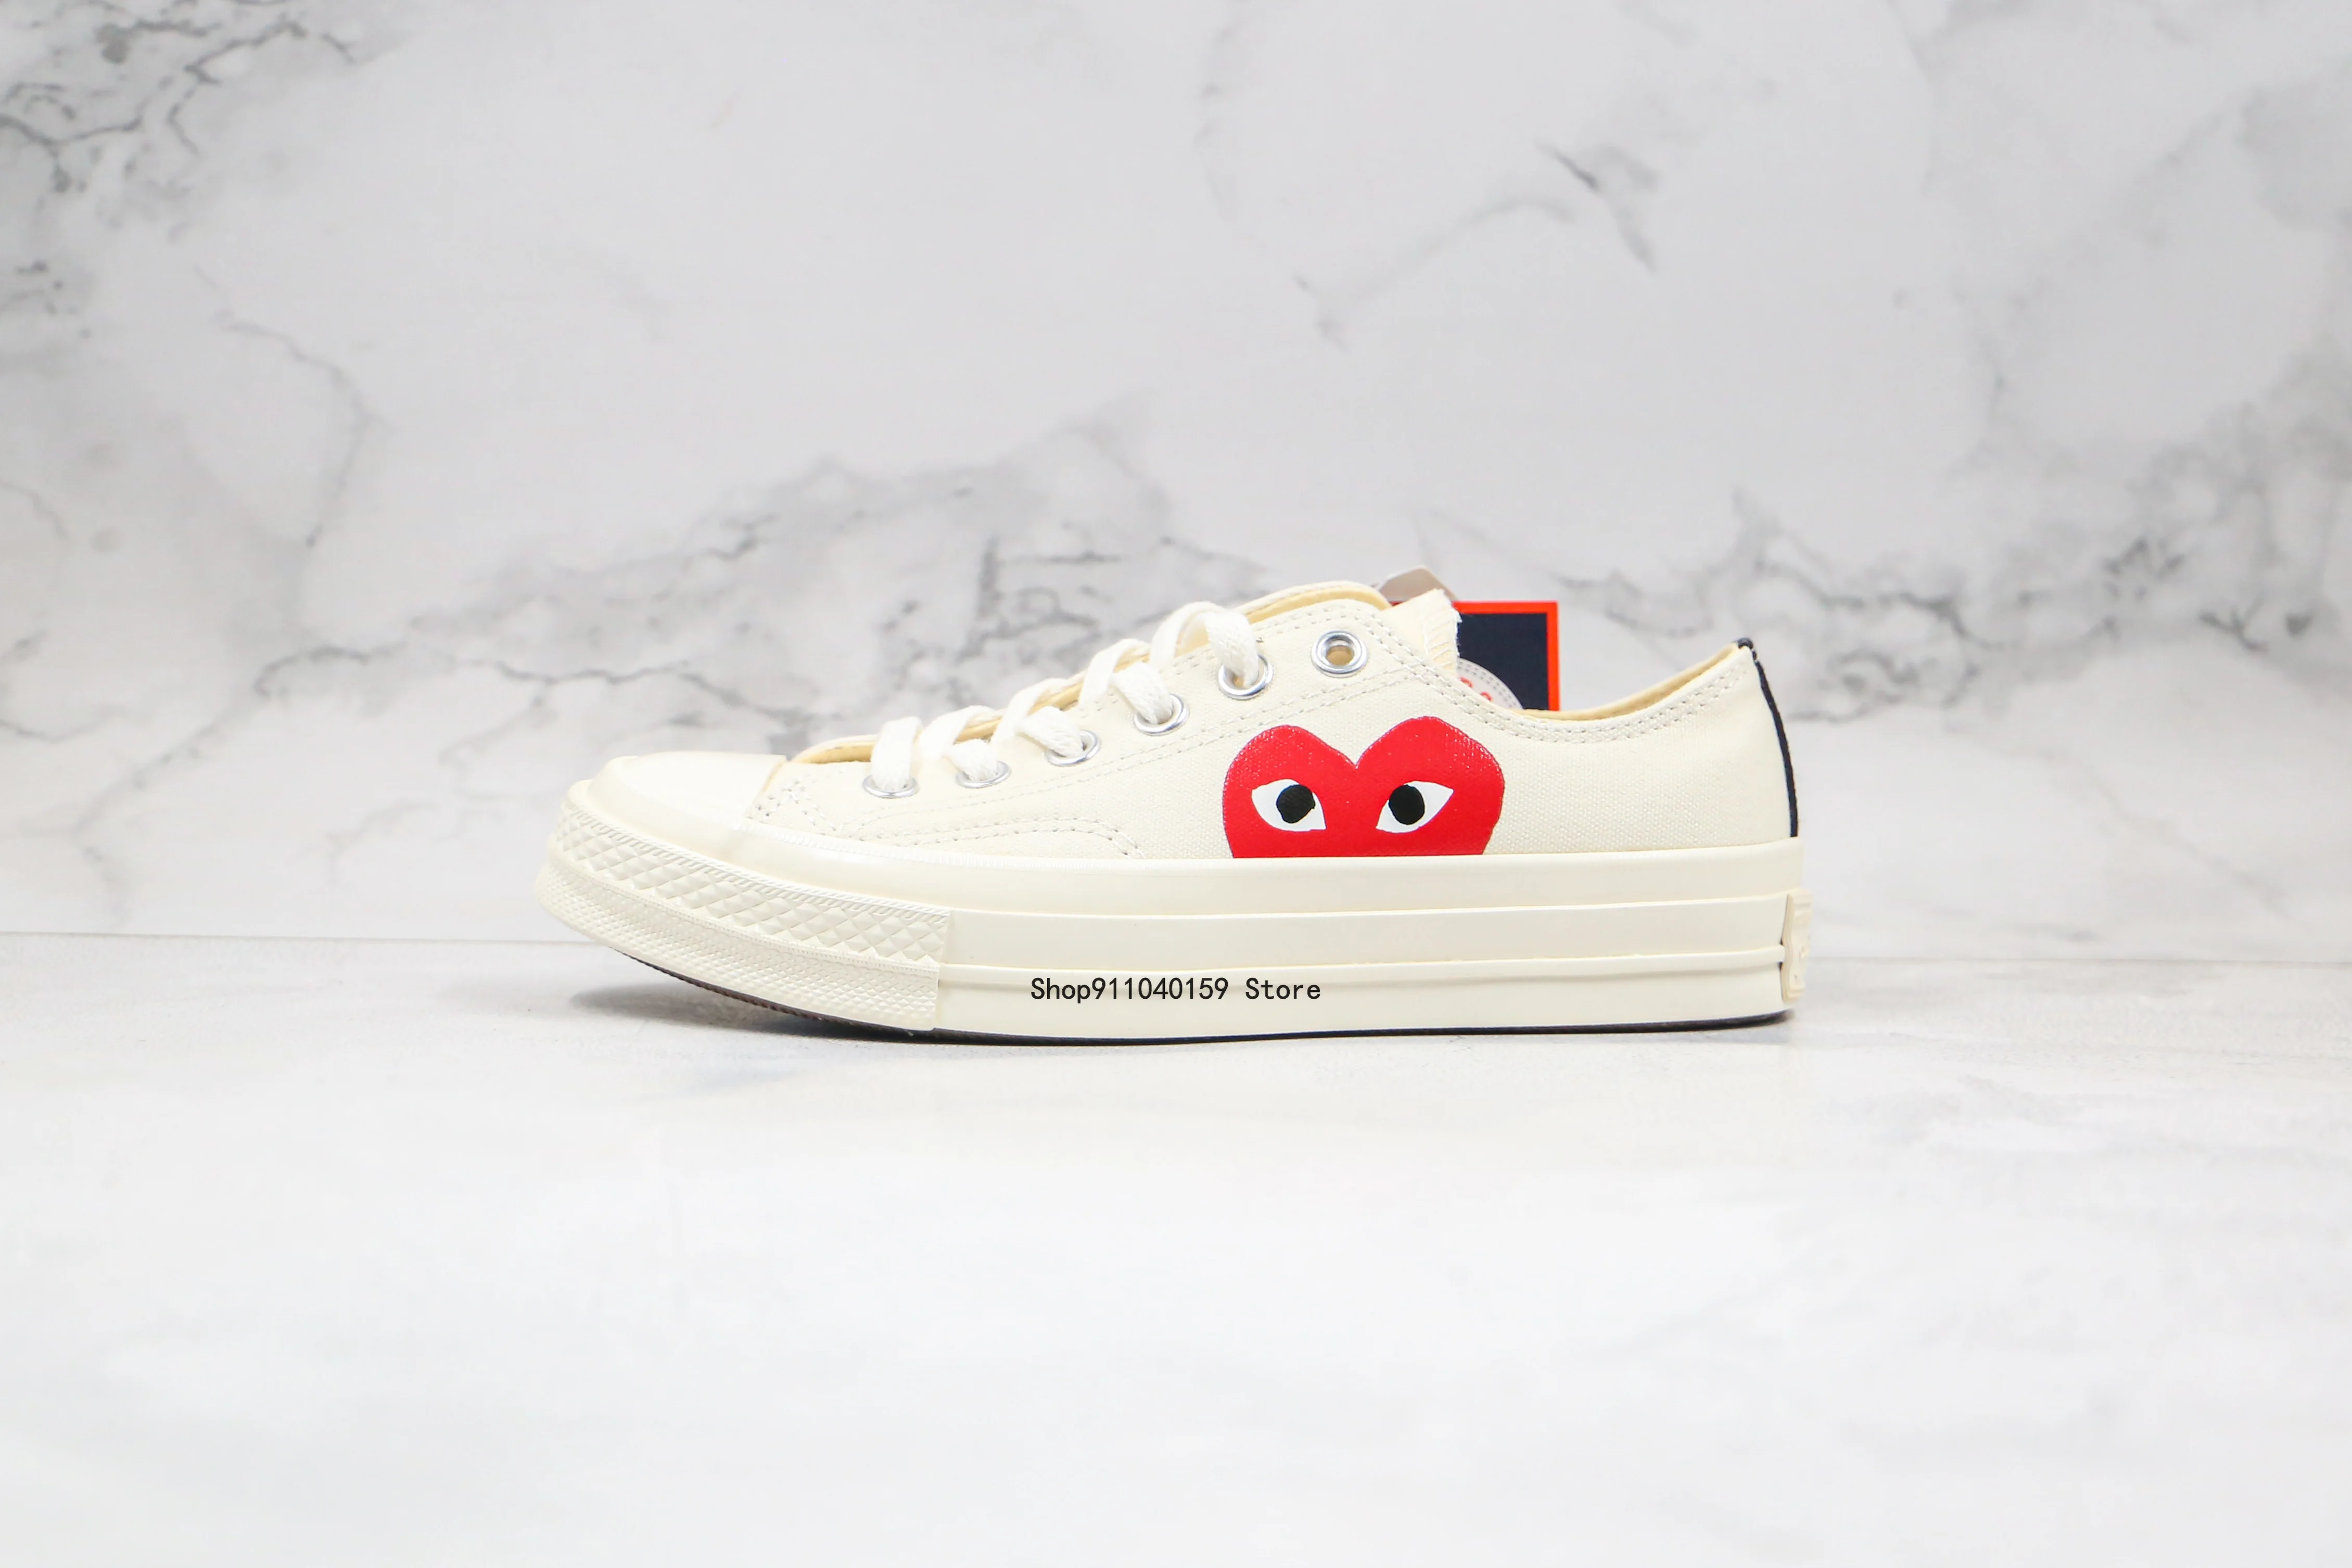 

Converse All star CDG PLAY x 1970s Daily leisure High/Low Unisex Shoes high quality Canvas Skateboard Shoes zapatillas sapatilla